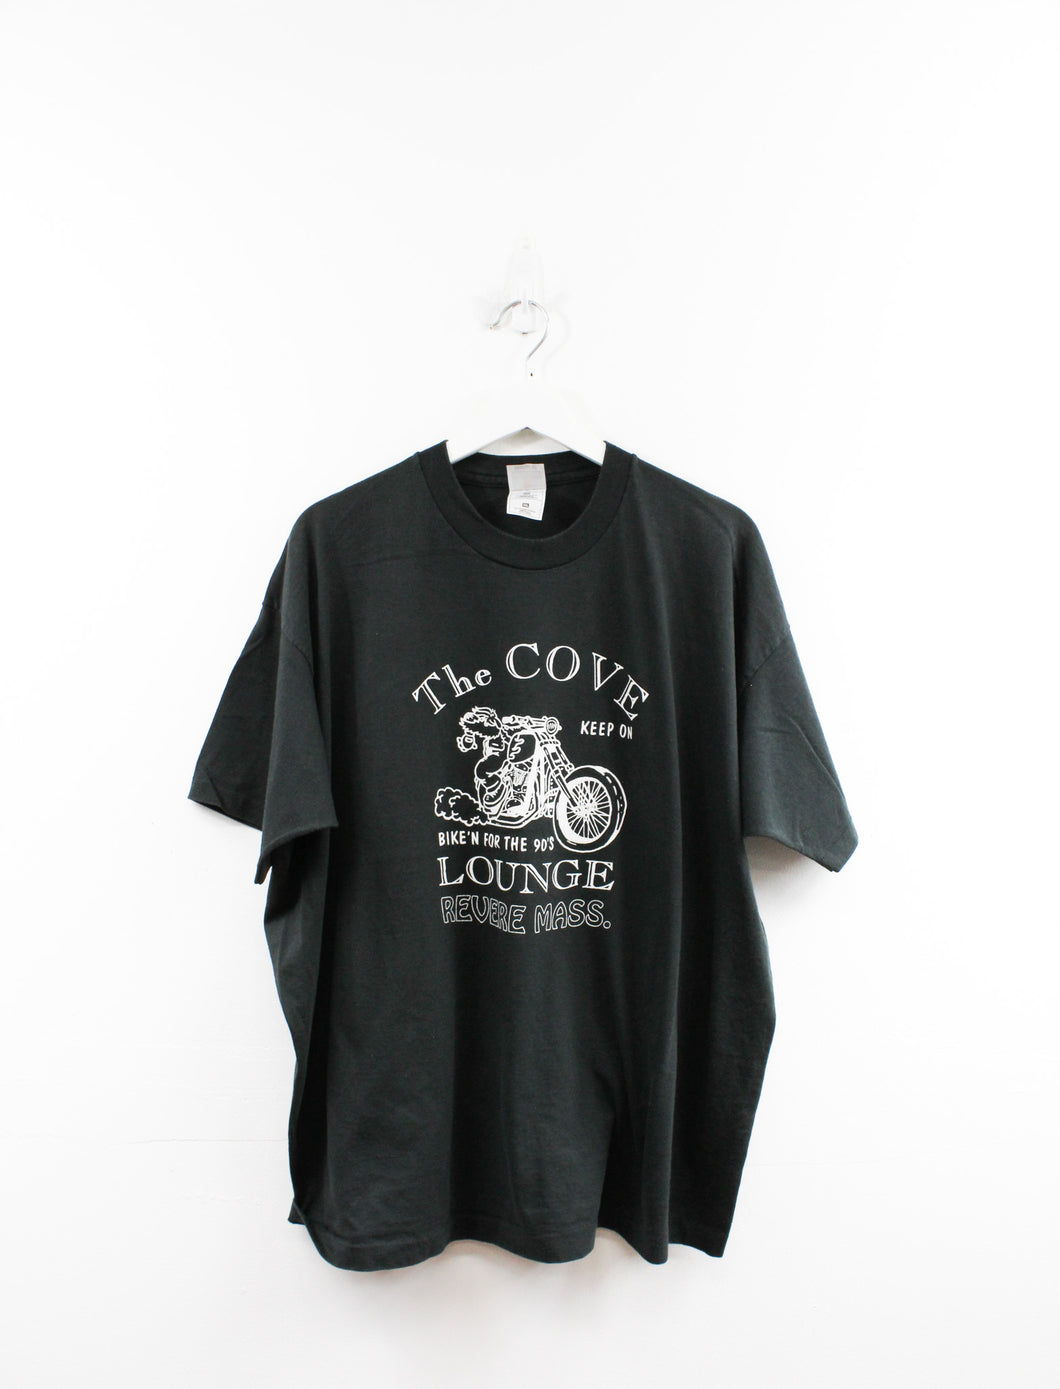 Vintage Single Stitch 90s The Cove Biker Bar Fruit Of The Loom Tee